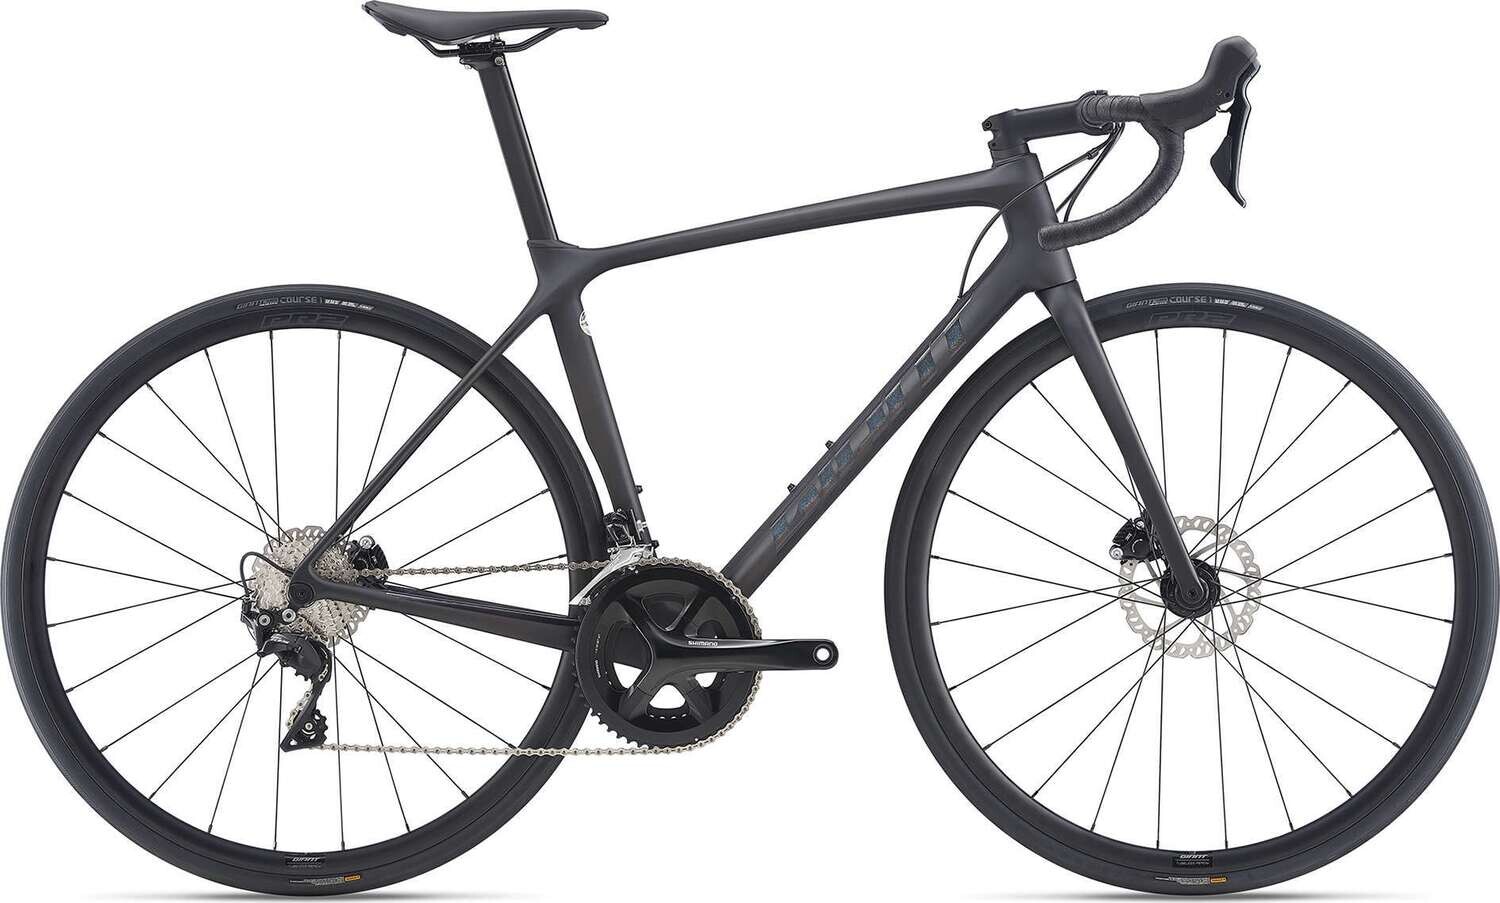 Giant TCR Advanced 2 Disc-Pro Compact